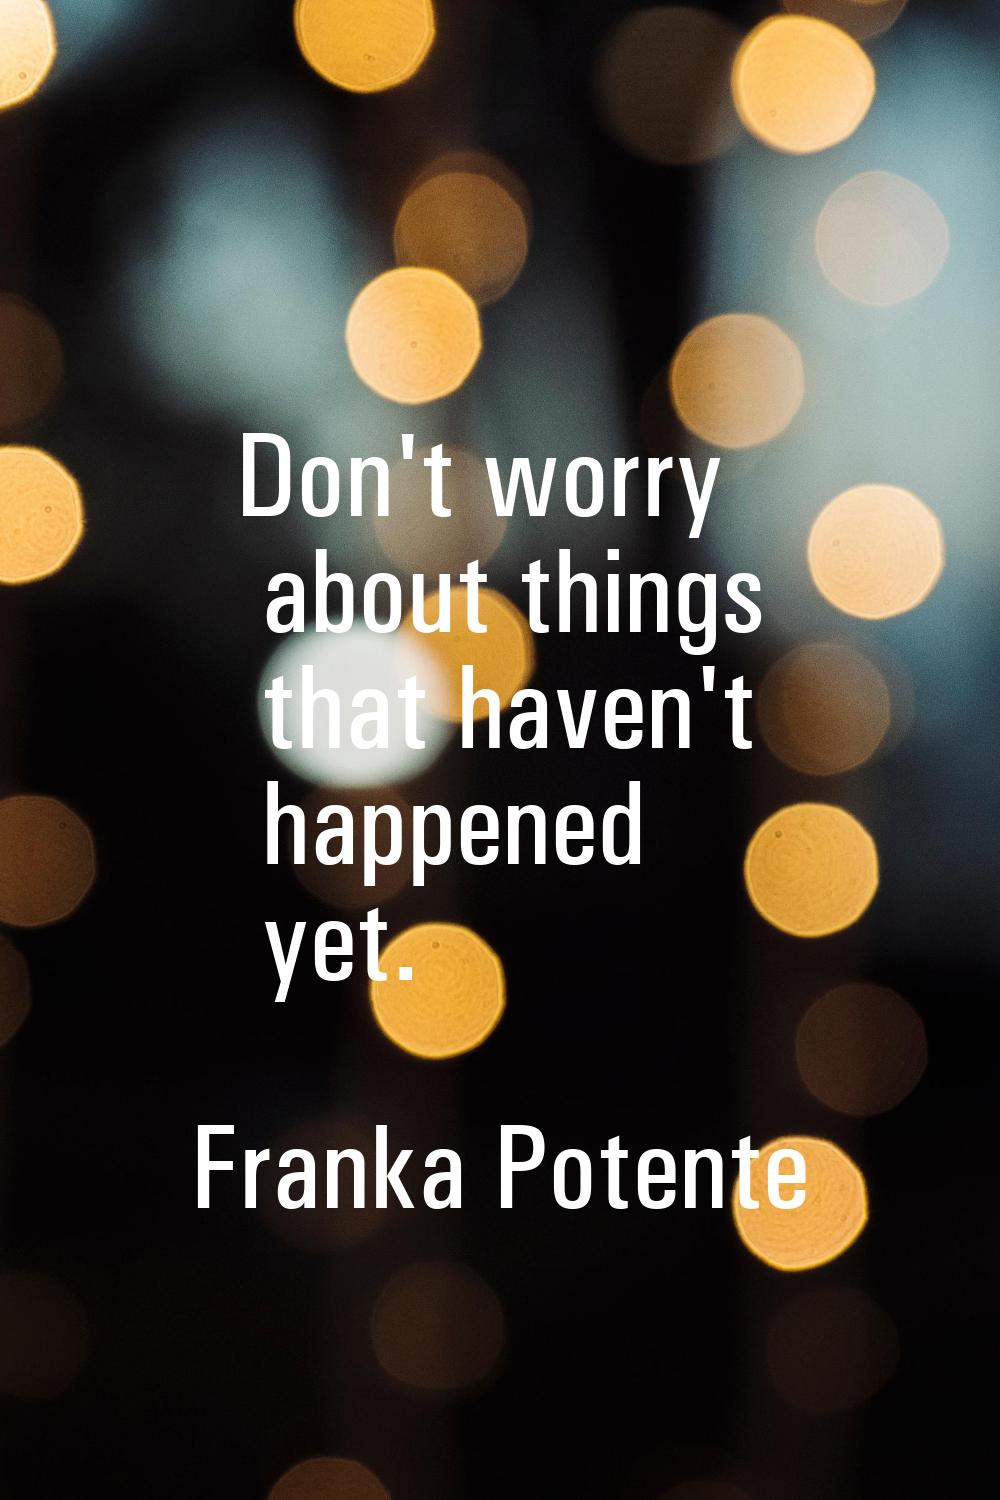 Don't worry about things that haven't happened yet.